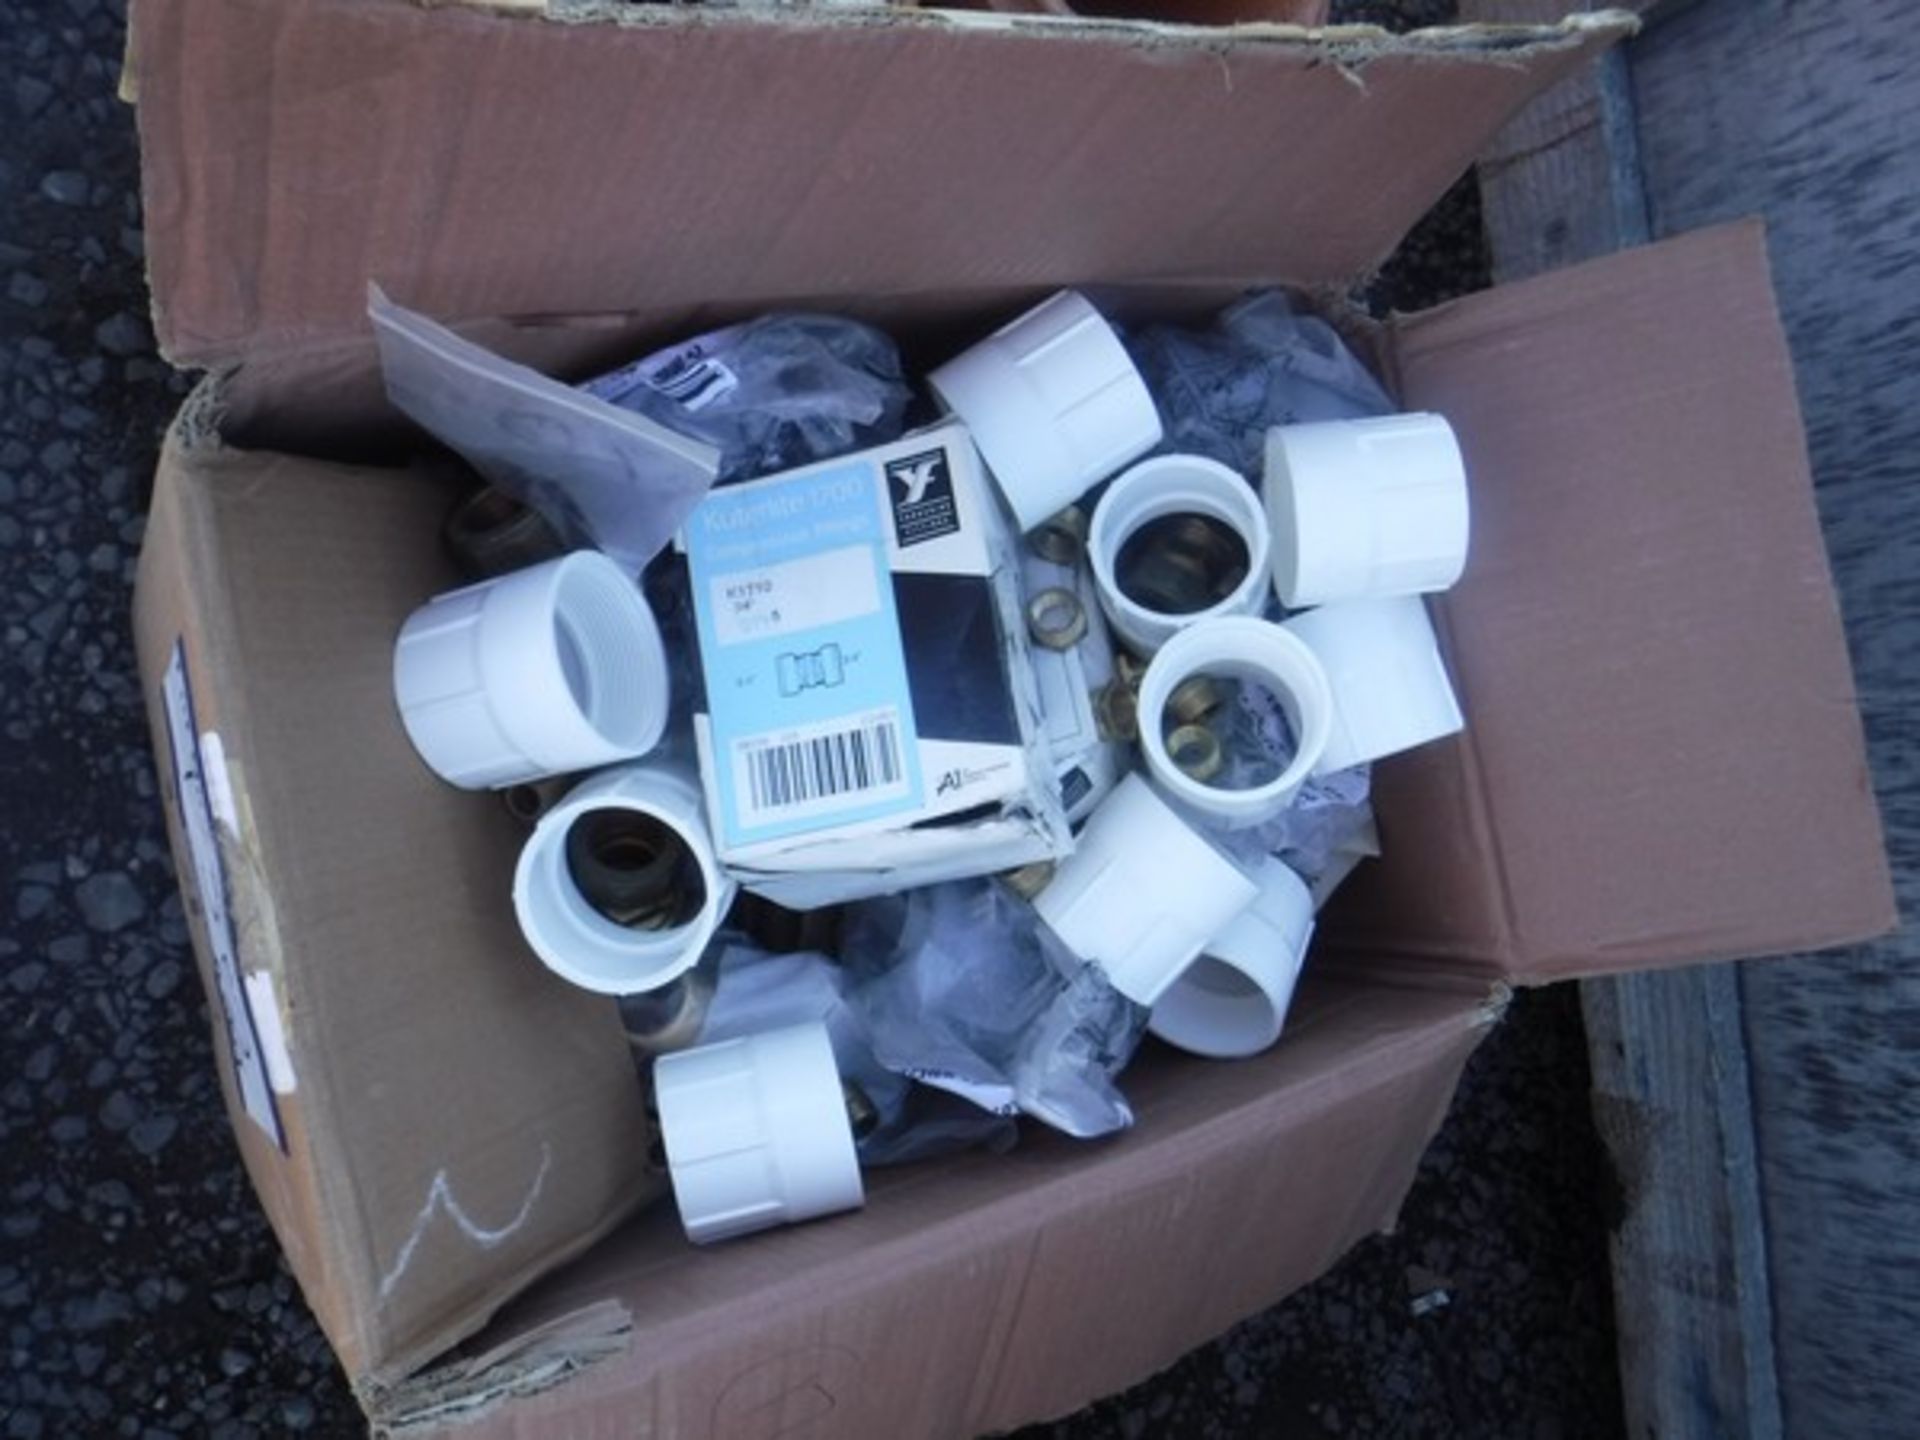 Plumbing joints,couplers,brass jets, clay pipes, lengths of plastic piping, toilet seats, various pl - Image 2 of 7